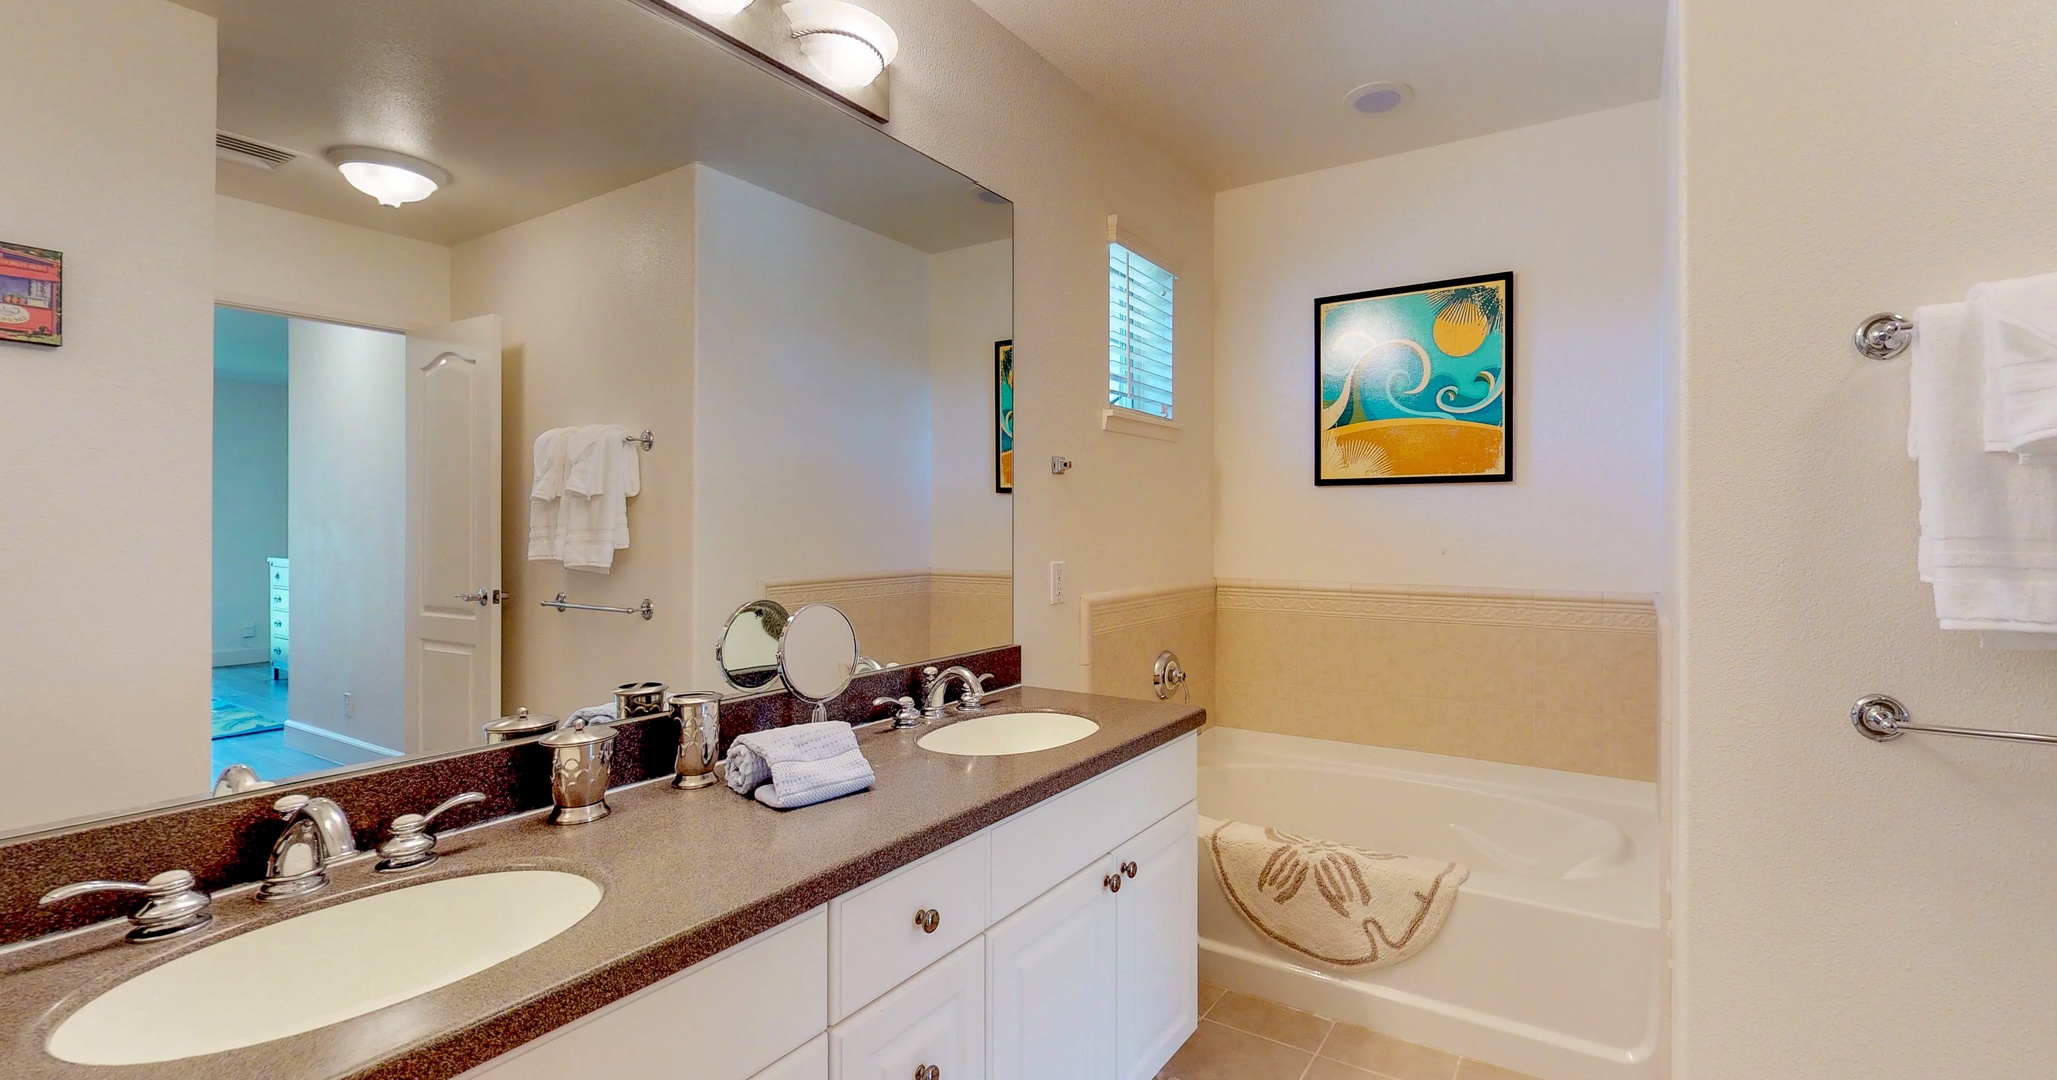 Kapolei Vacation Rentals, Ko Olina Kai 1051D - The primary guest bathroom upstairs with a soaking tub.